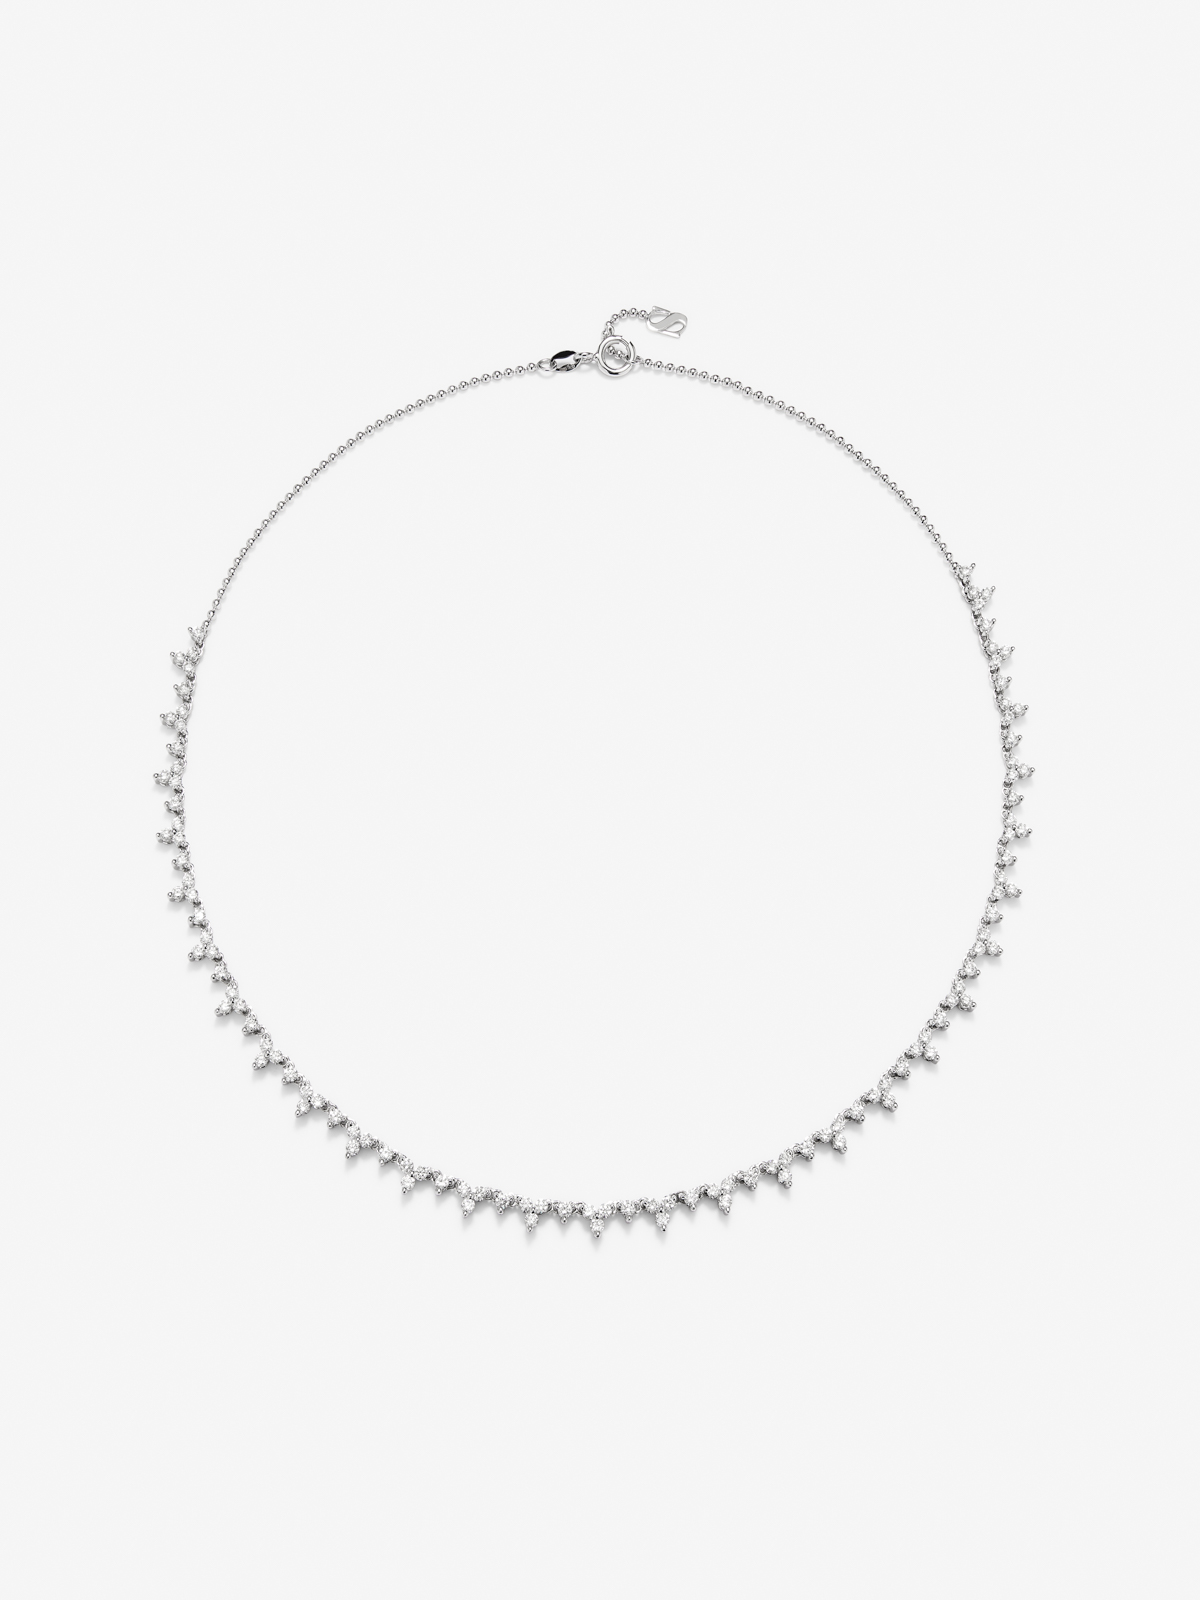 18K White Gold Rivière Necklace with white diamonds in 3.3 cts